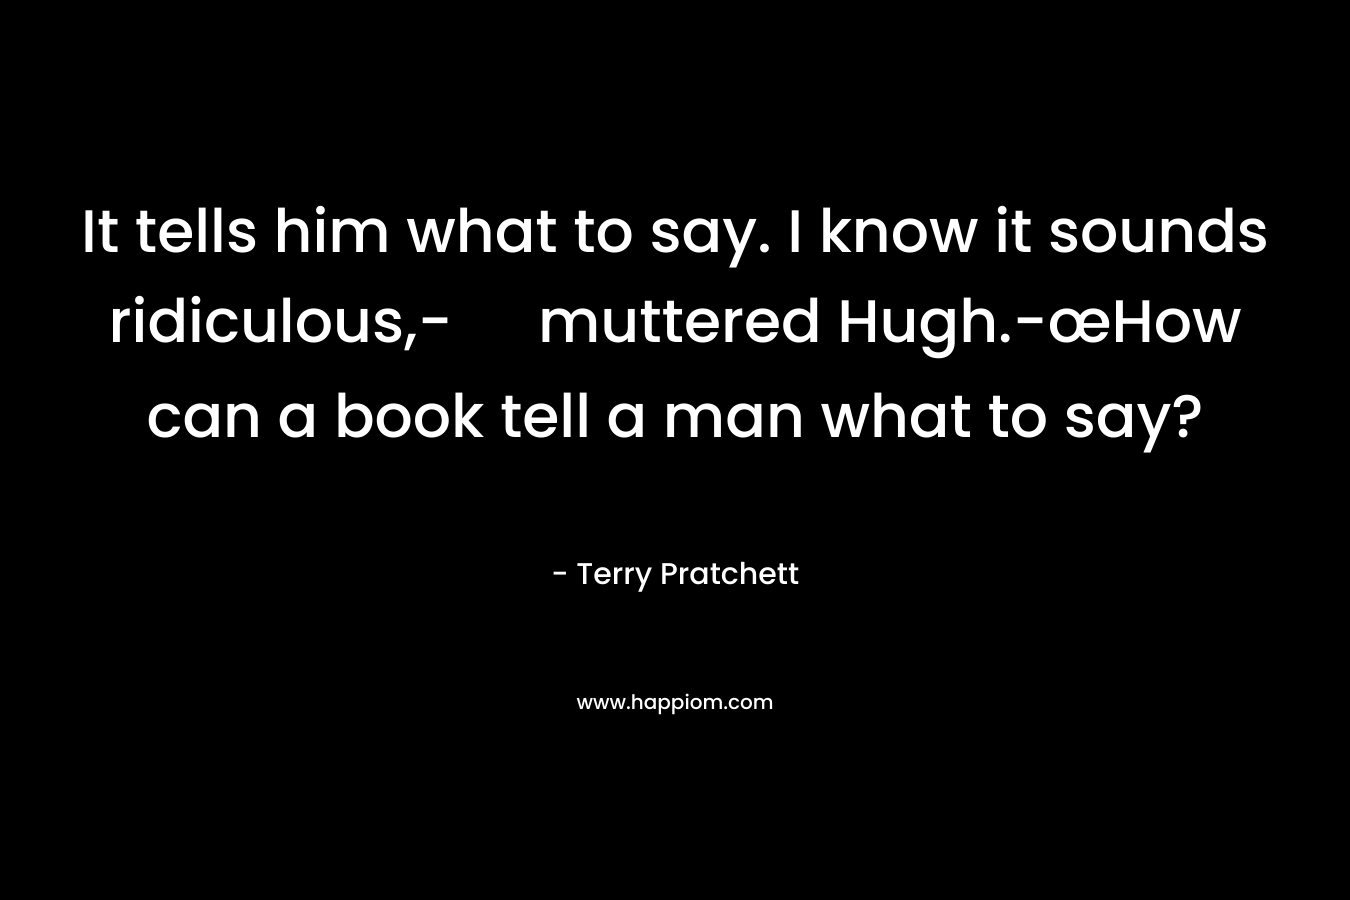 It tells him what to say. I know it sounds ridiculous,- muttered Hugh.-œHow can a book tell a man what to say? – Terry Pratchett